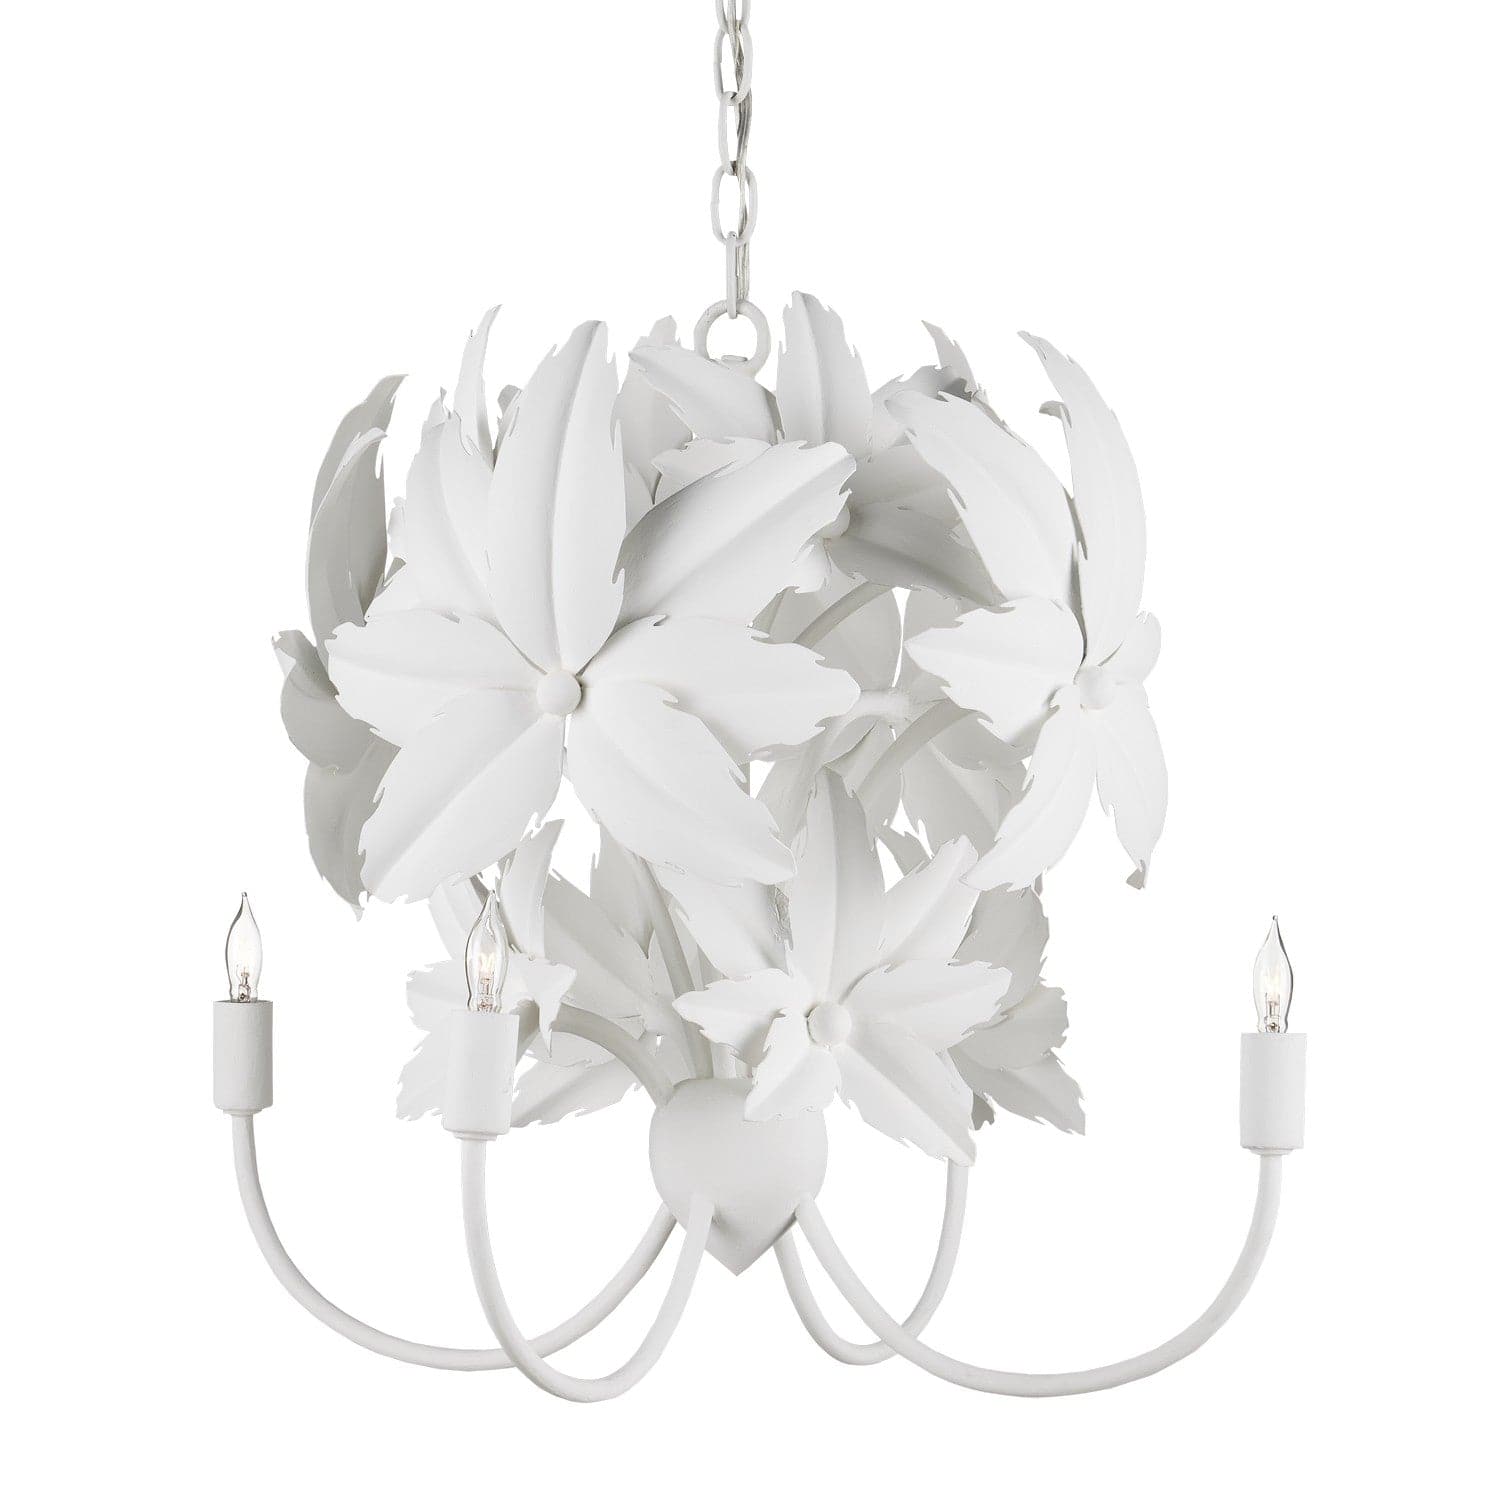 Currey and Company - 9000-0987 - Four Light Chandelier - Gesso White/Painted Gesso White